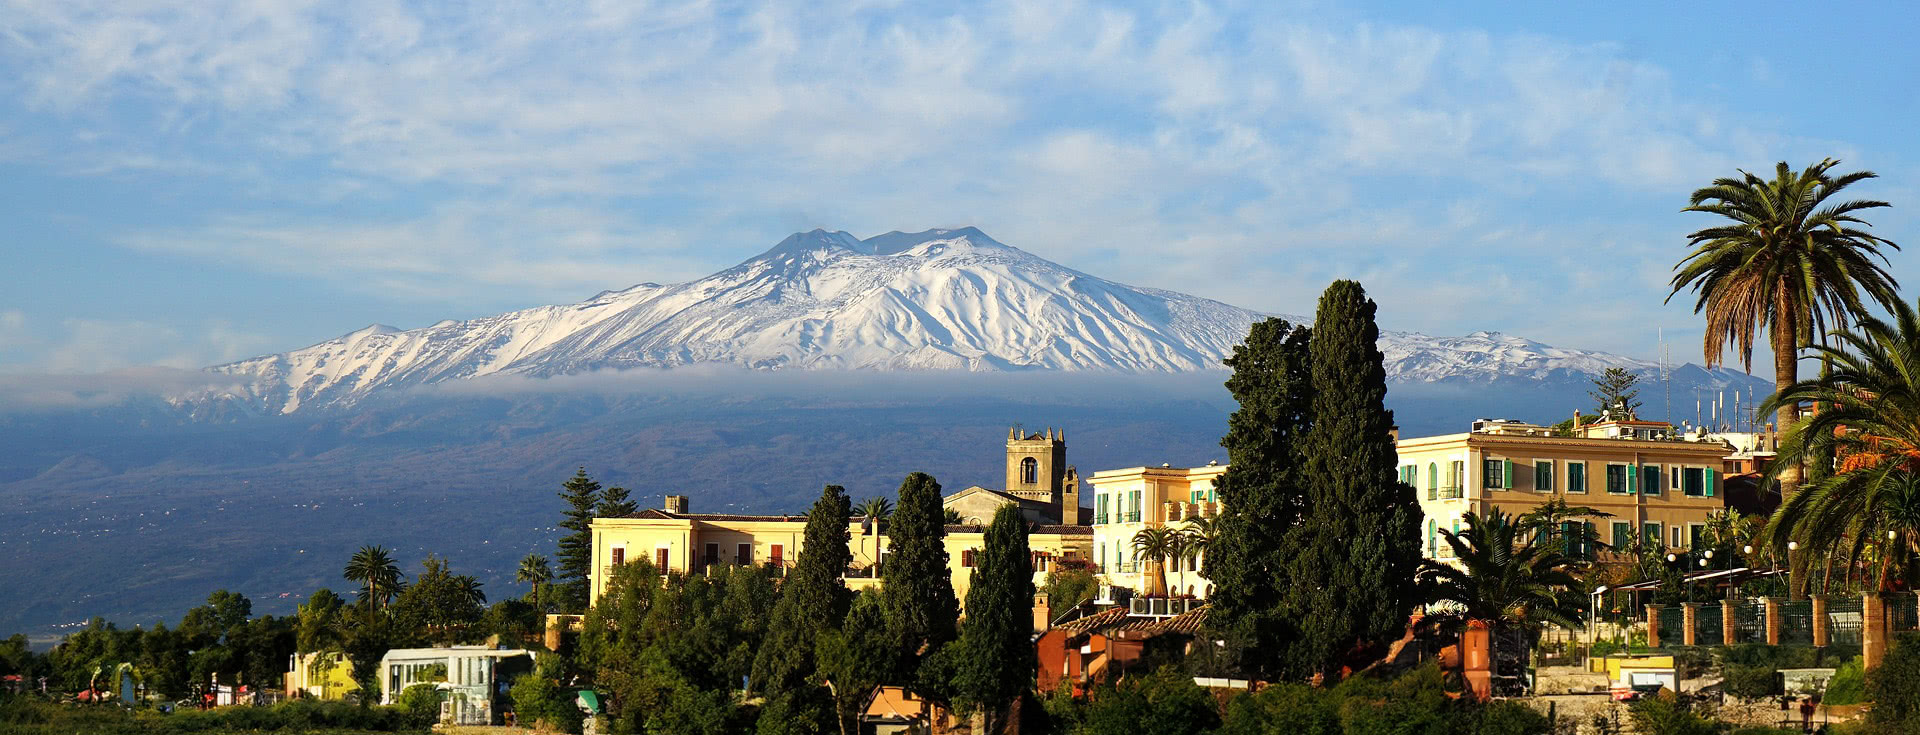 View of Mount Etna from the city of Catania